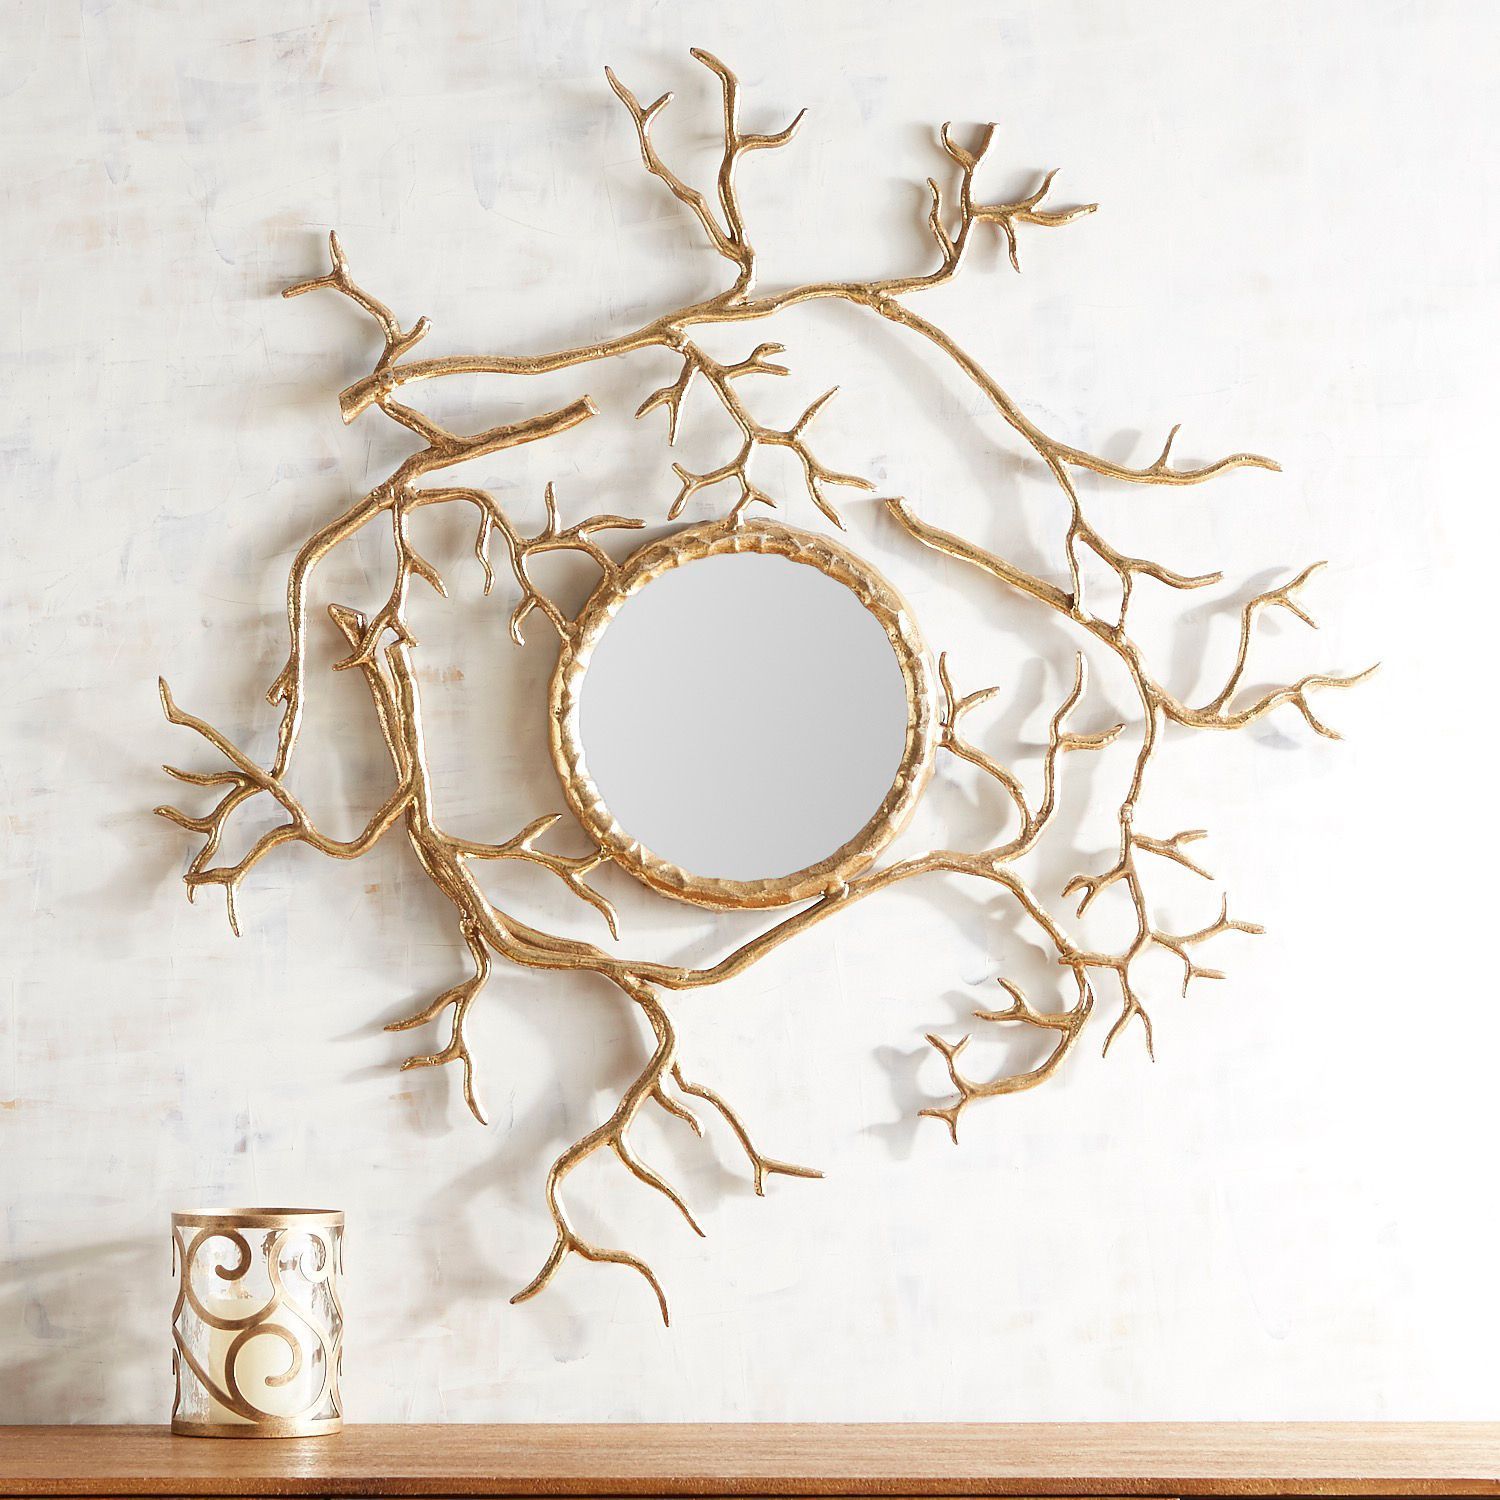 Golden Branches Mirror | Pier 1 Imports | Mirror Crafts, Decor, Branch Inside Best And Newest Twisted Sunburst Metal Wall Art (View 14 of 20)